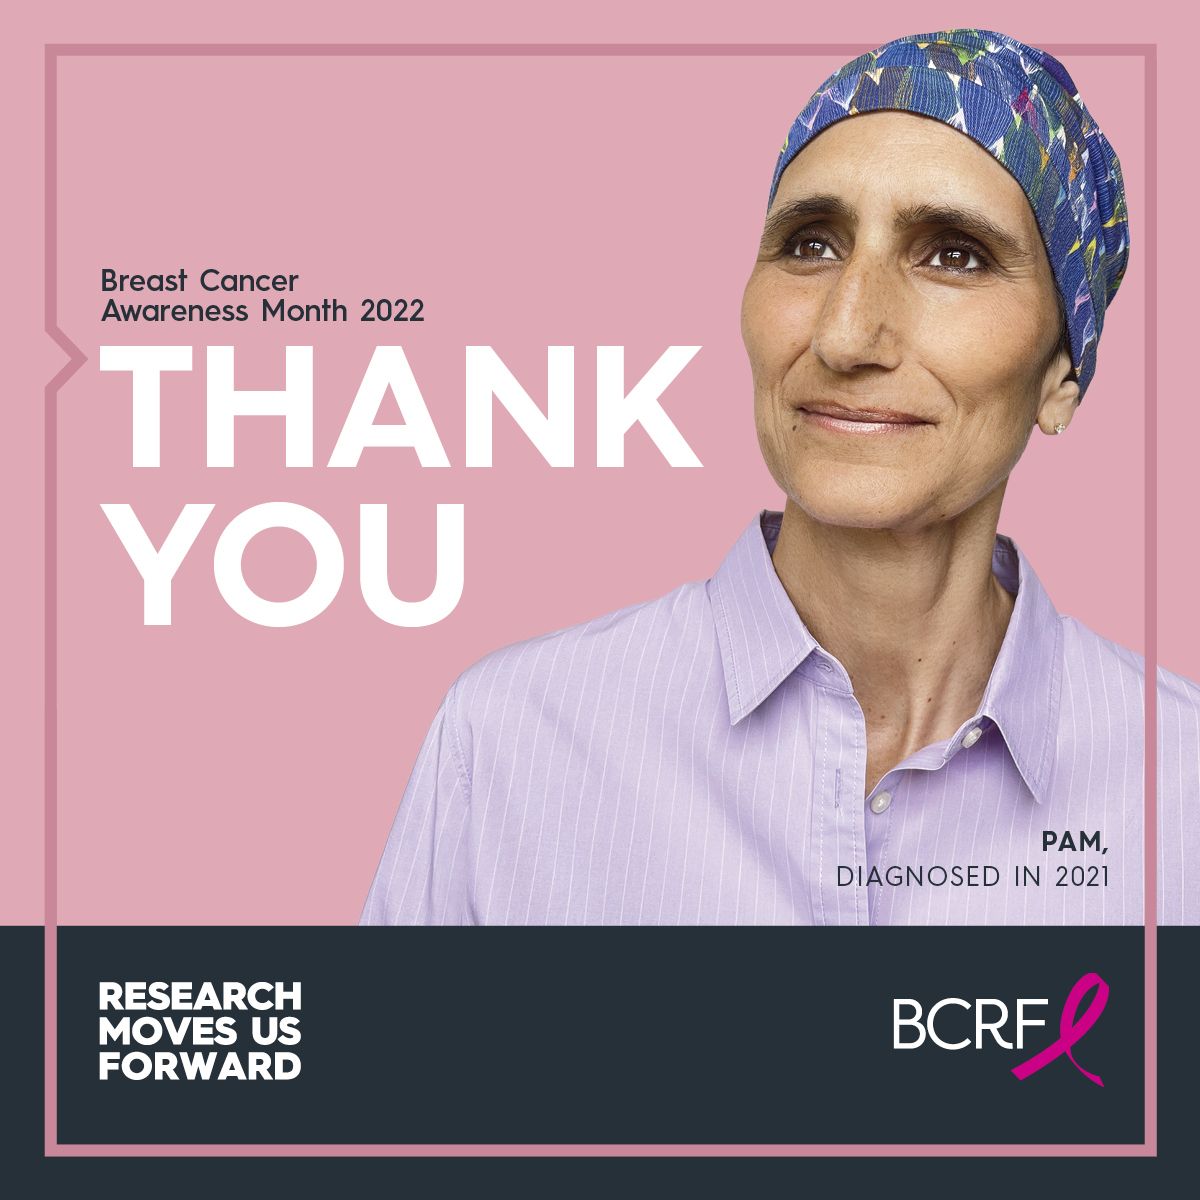 Last month, we asked you to support BCRF and lifesaving breast cancer research for Pam and so many others. We're incredibly grateful and inspired by your generosity. Because you move BCRF forward, BCRF can move research forward—faster. We sincerely thank you. #bcsm